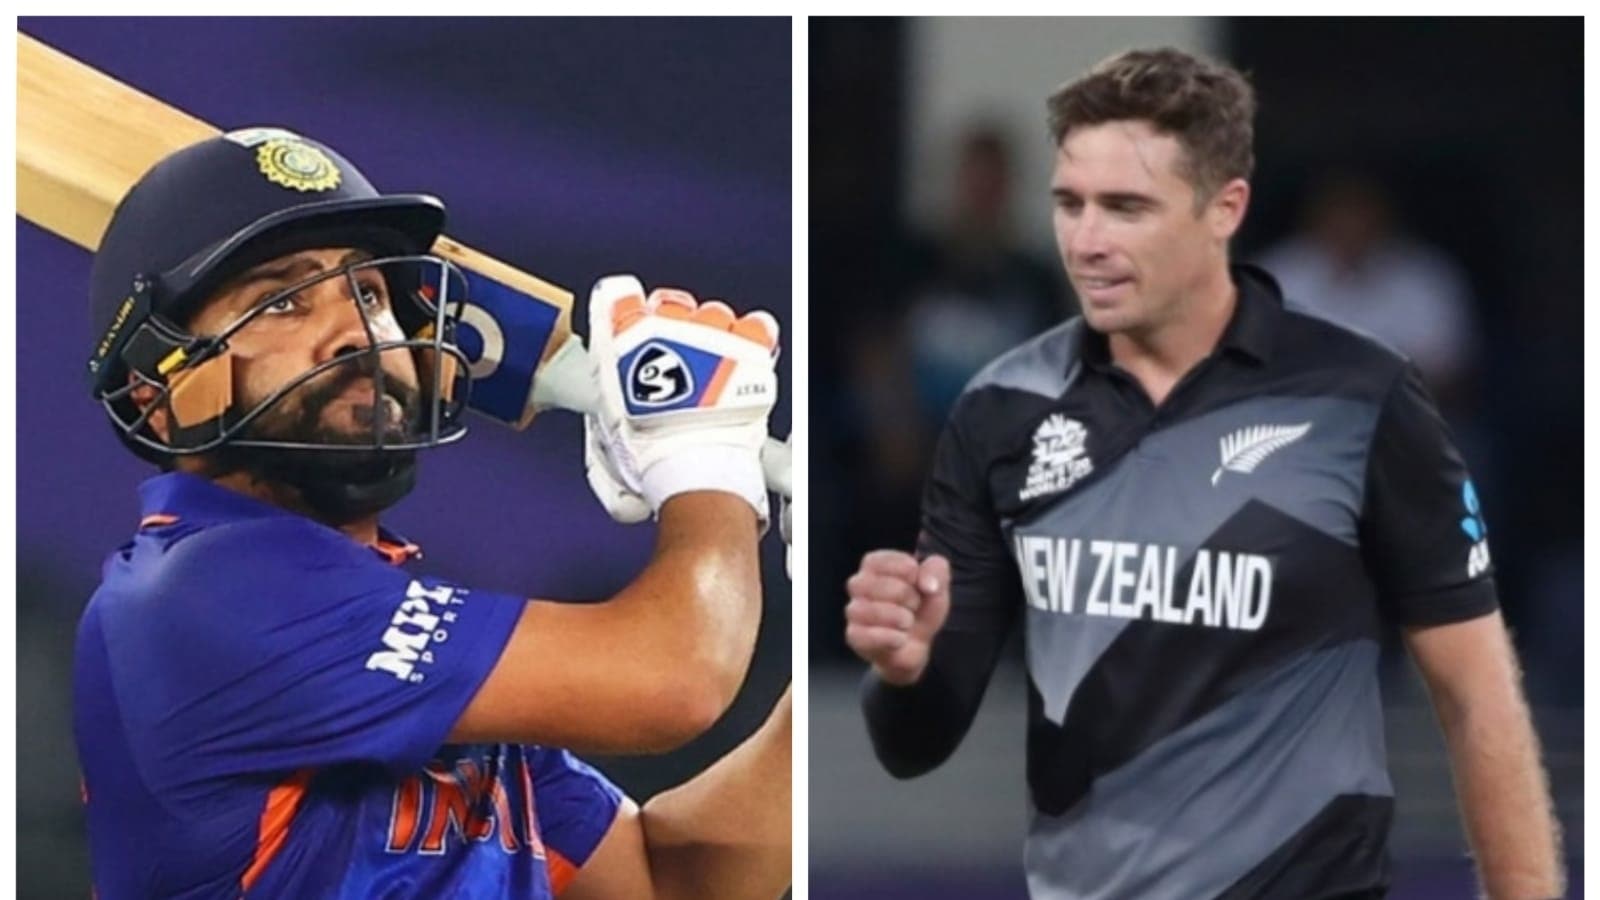 India vs New Zealand 1st T20 Live Streaming When and Where to watch IND vs NZ 1st T20I Live on TV and Online Cricket